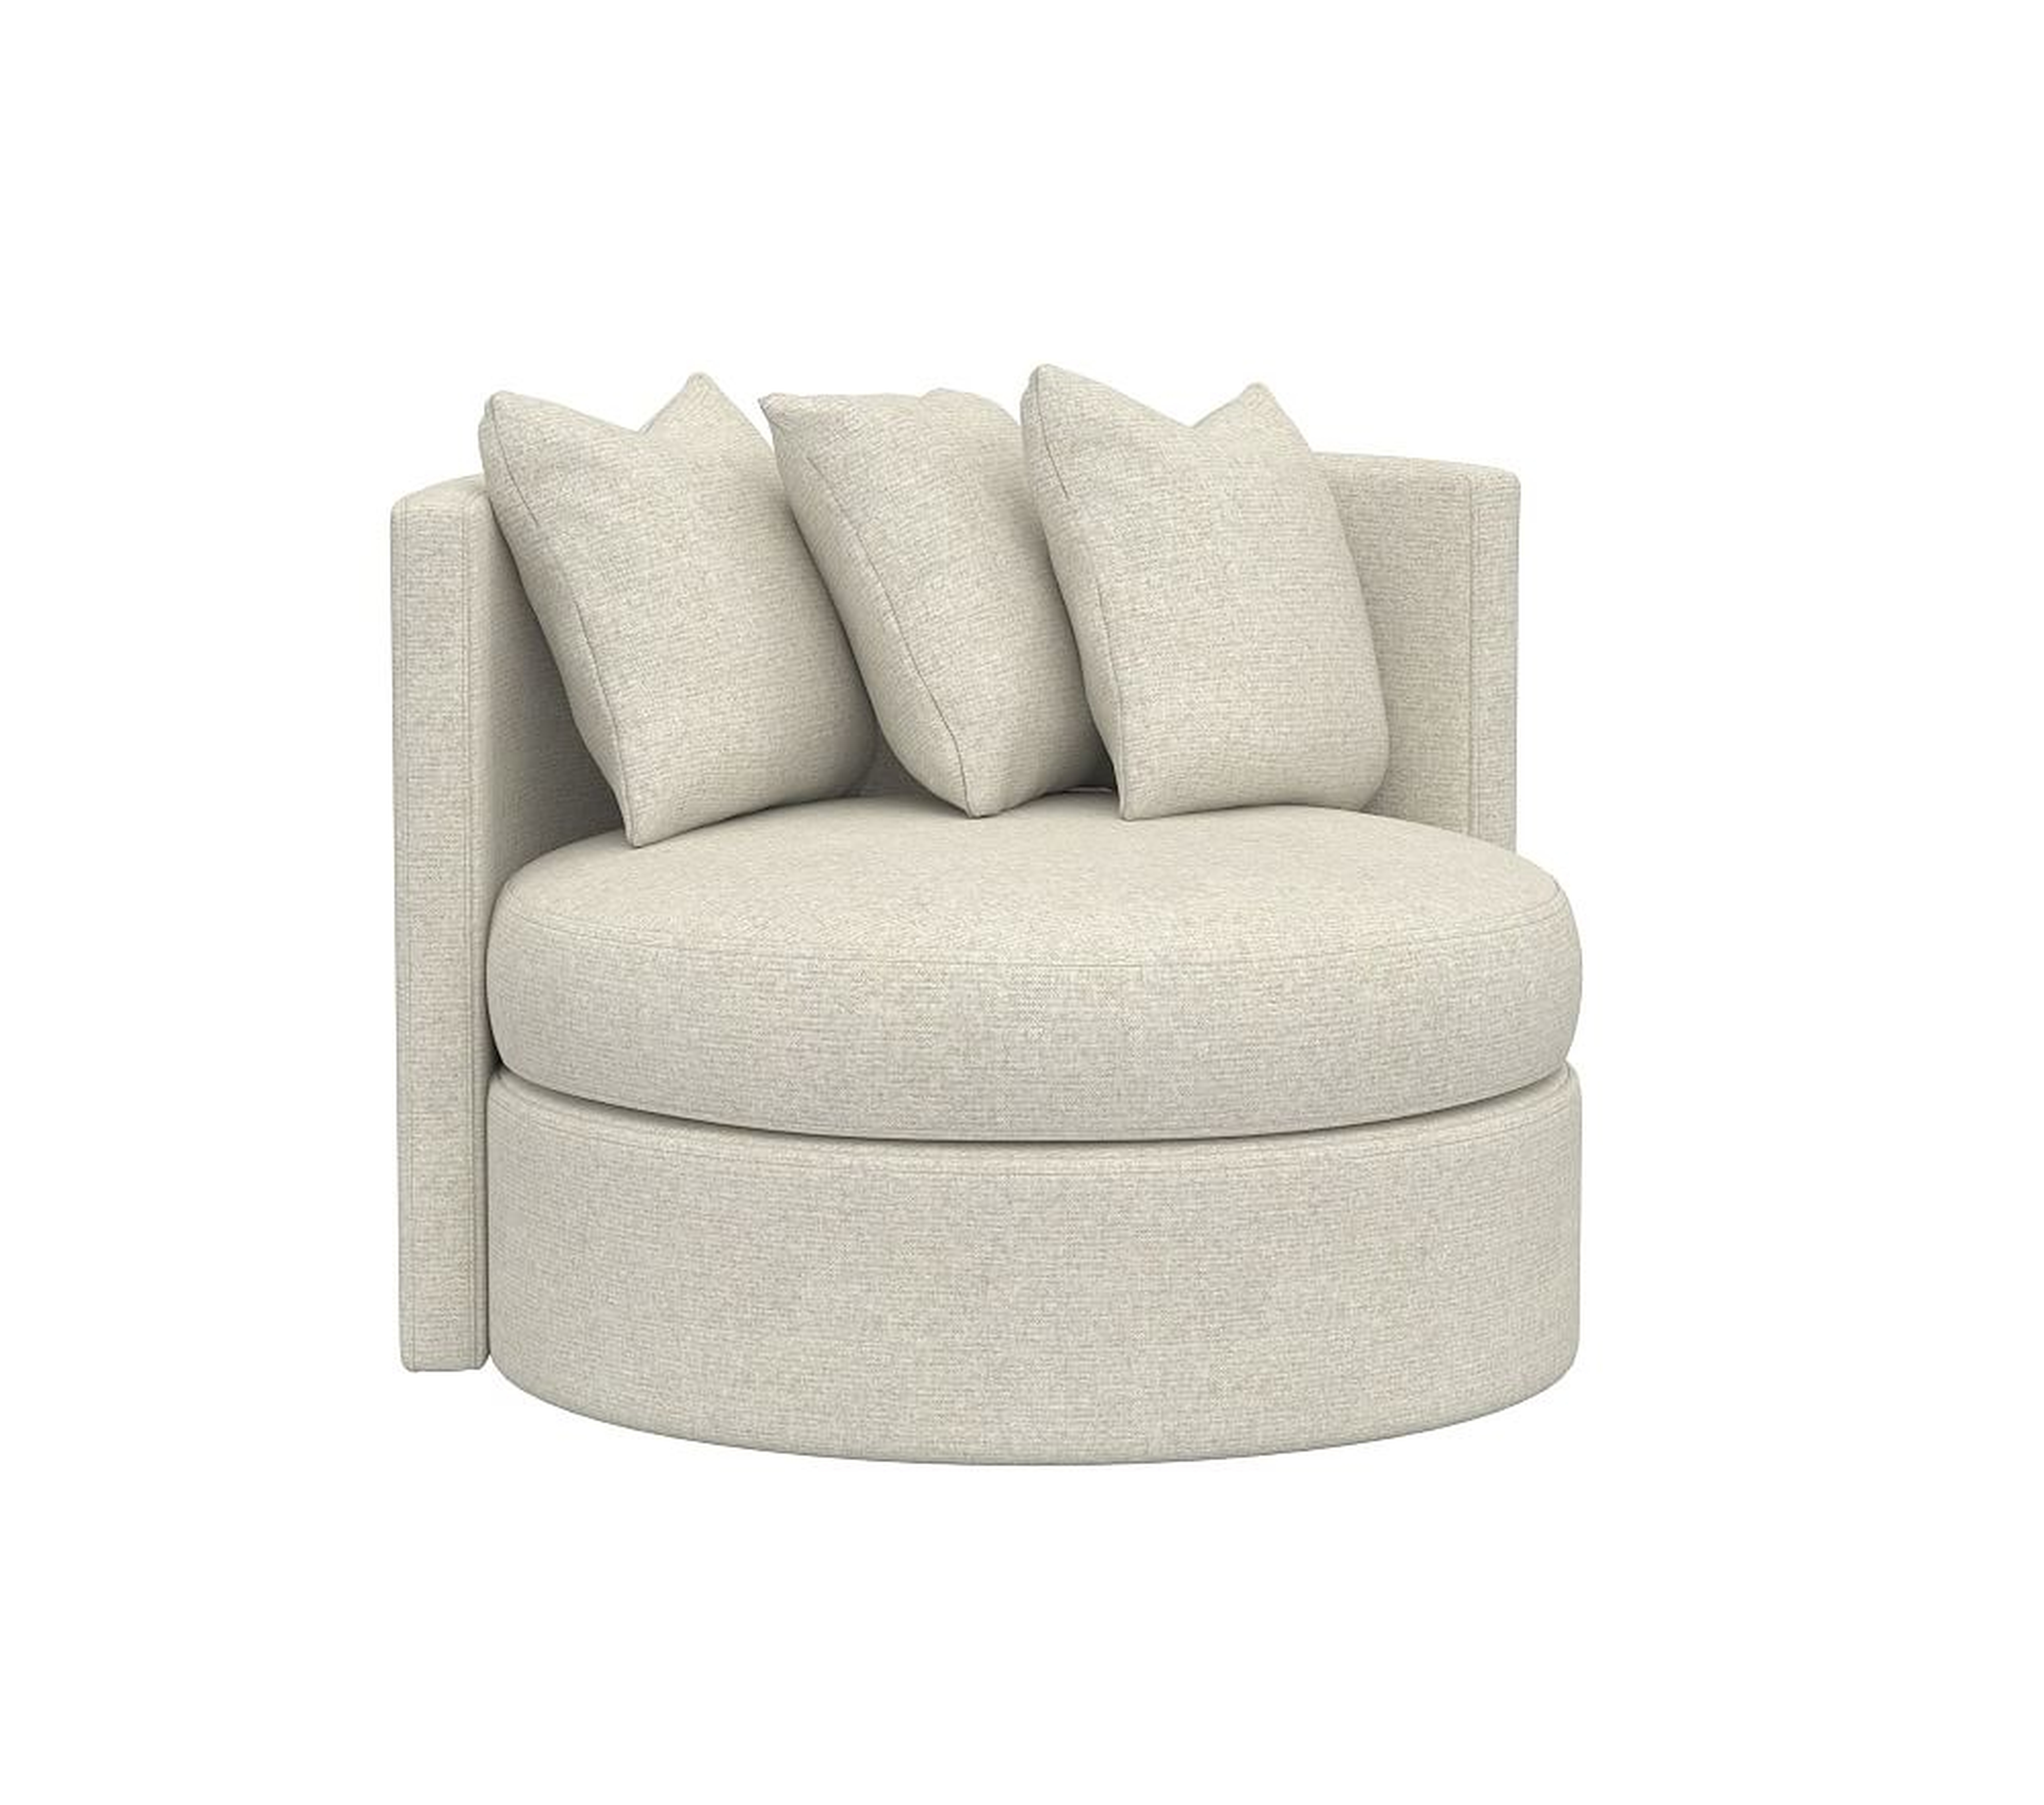 Roundabout Chair Performance Heathered Basketweave Alabaster White - Pottery Barn Kids